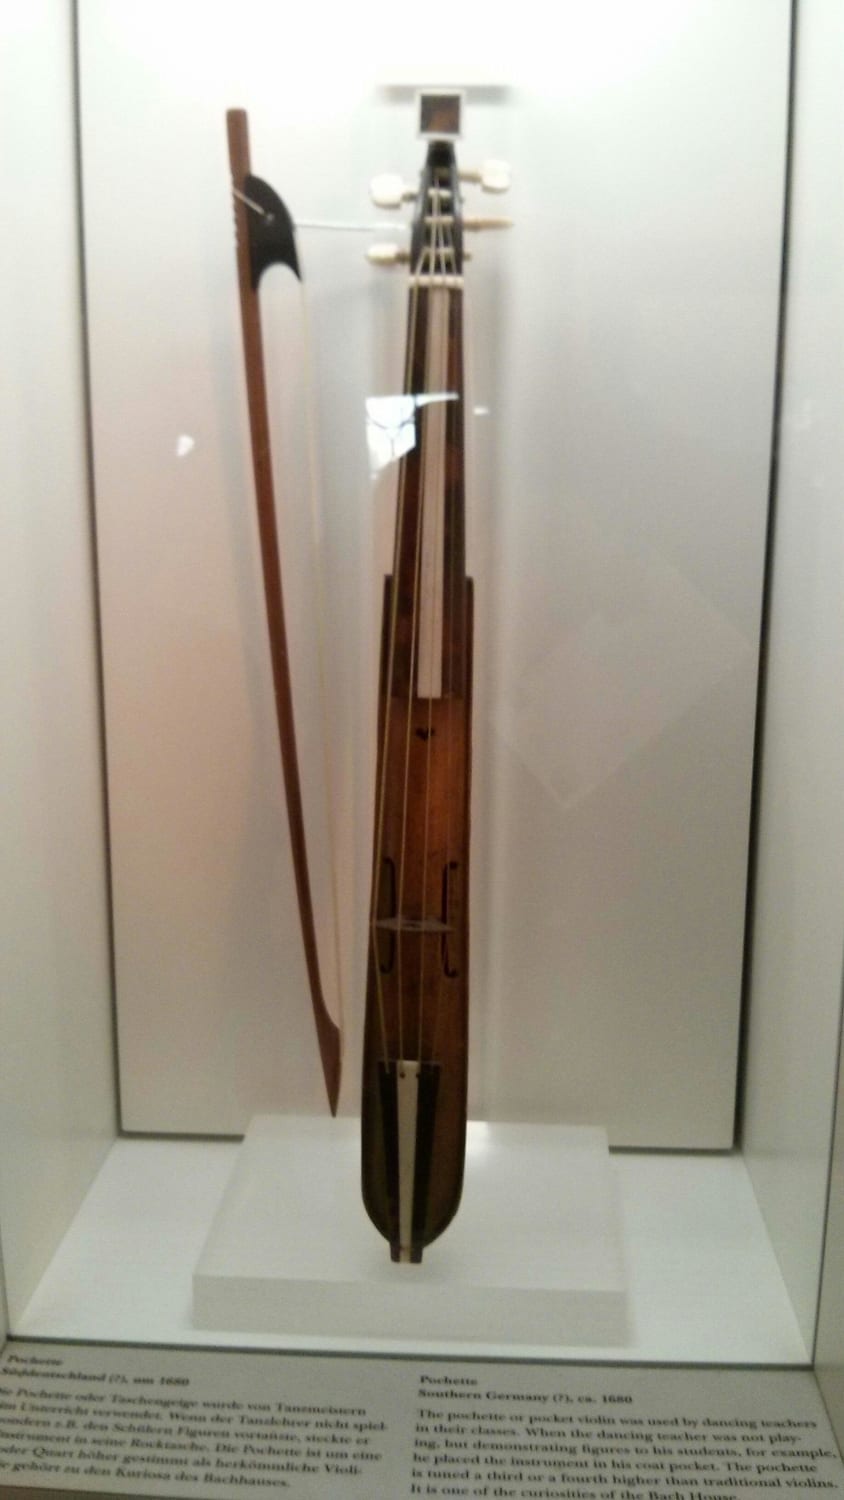 The Pochette (1680) displayed in Bachhaus, Eisenach, Germany. Pochette (pocket violin) was used by dancing teachers to keep violin in reach while demonstrating figures and movements.